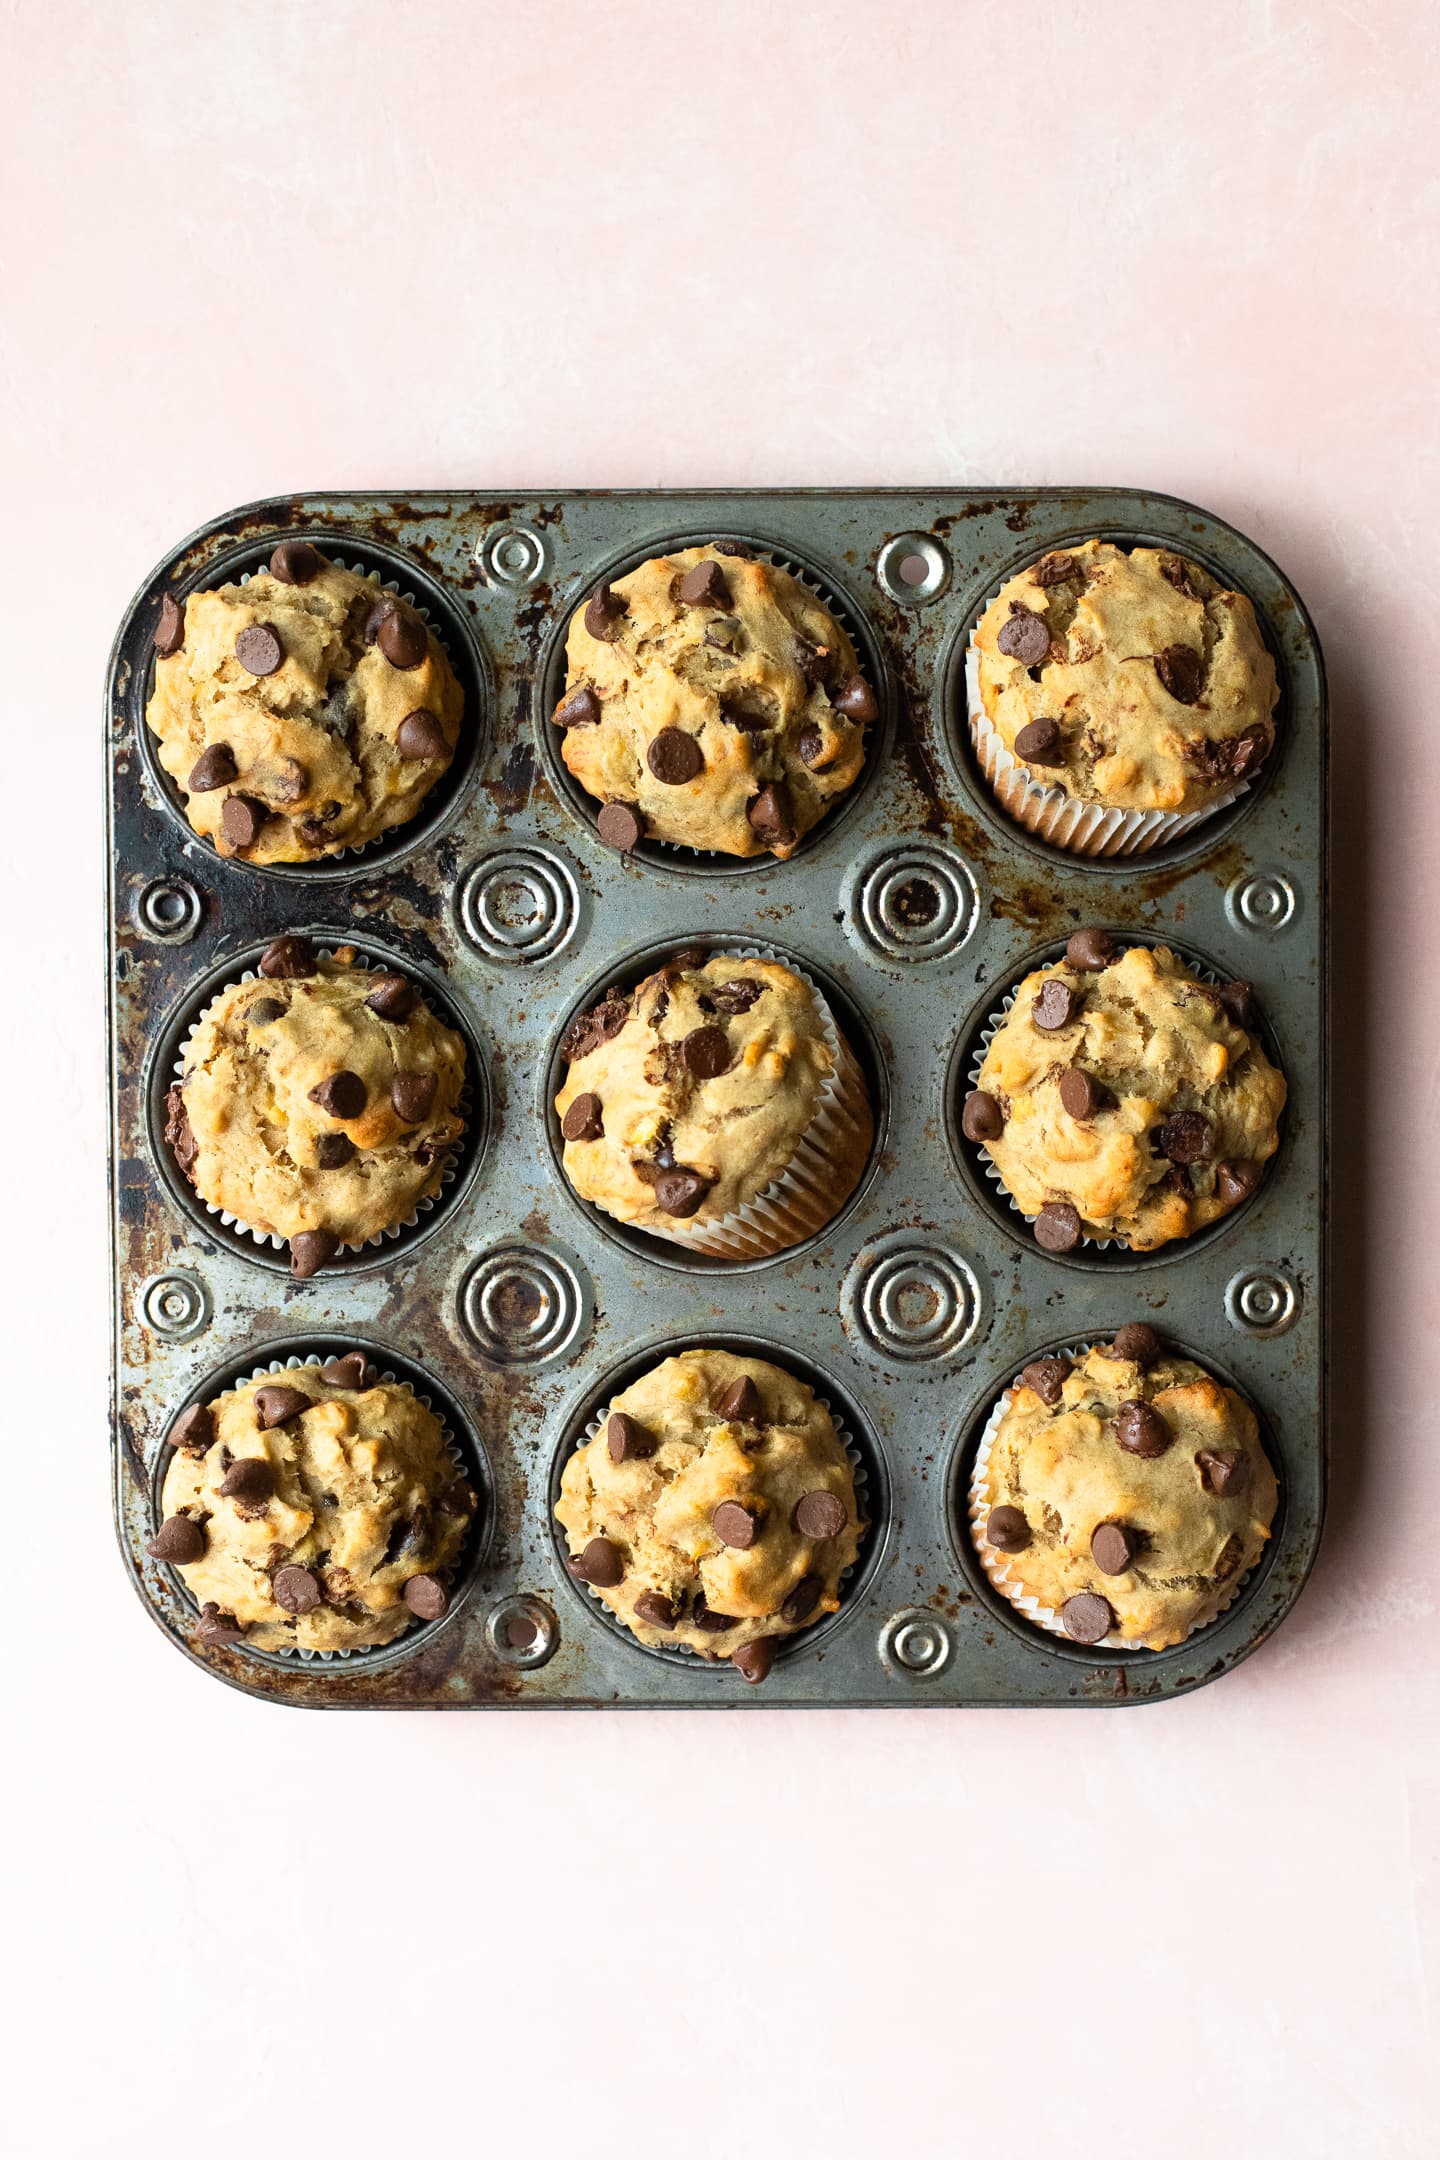 Overhead view of Peanut Butter Banana Chocolate Chip Muffins in a muffin pan on a light pink backdrop.